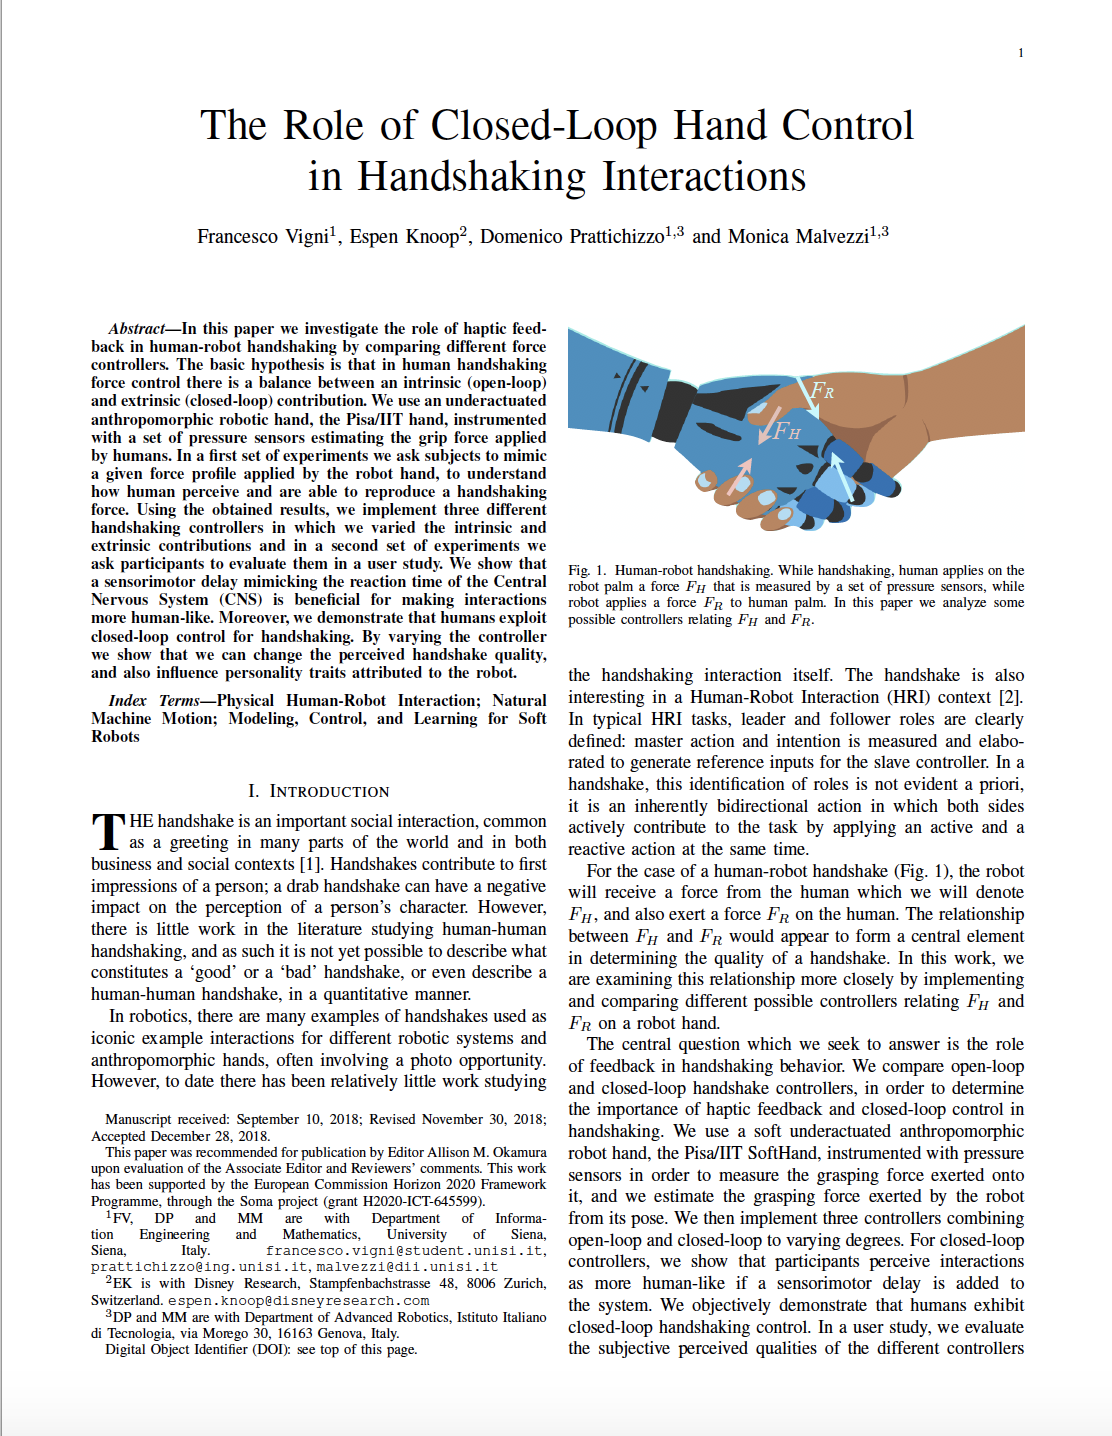 The Role of Closed-Loop Hand Control in Handshaking Interactions